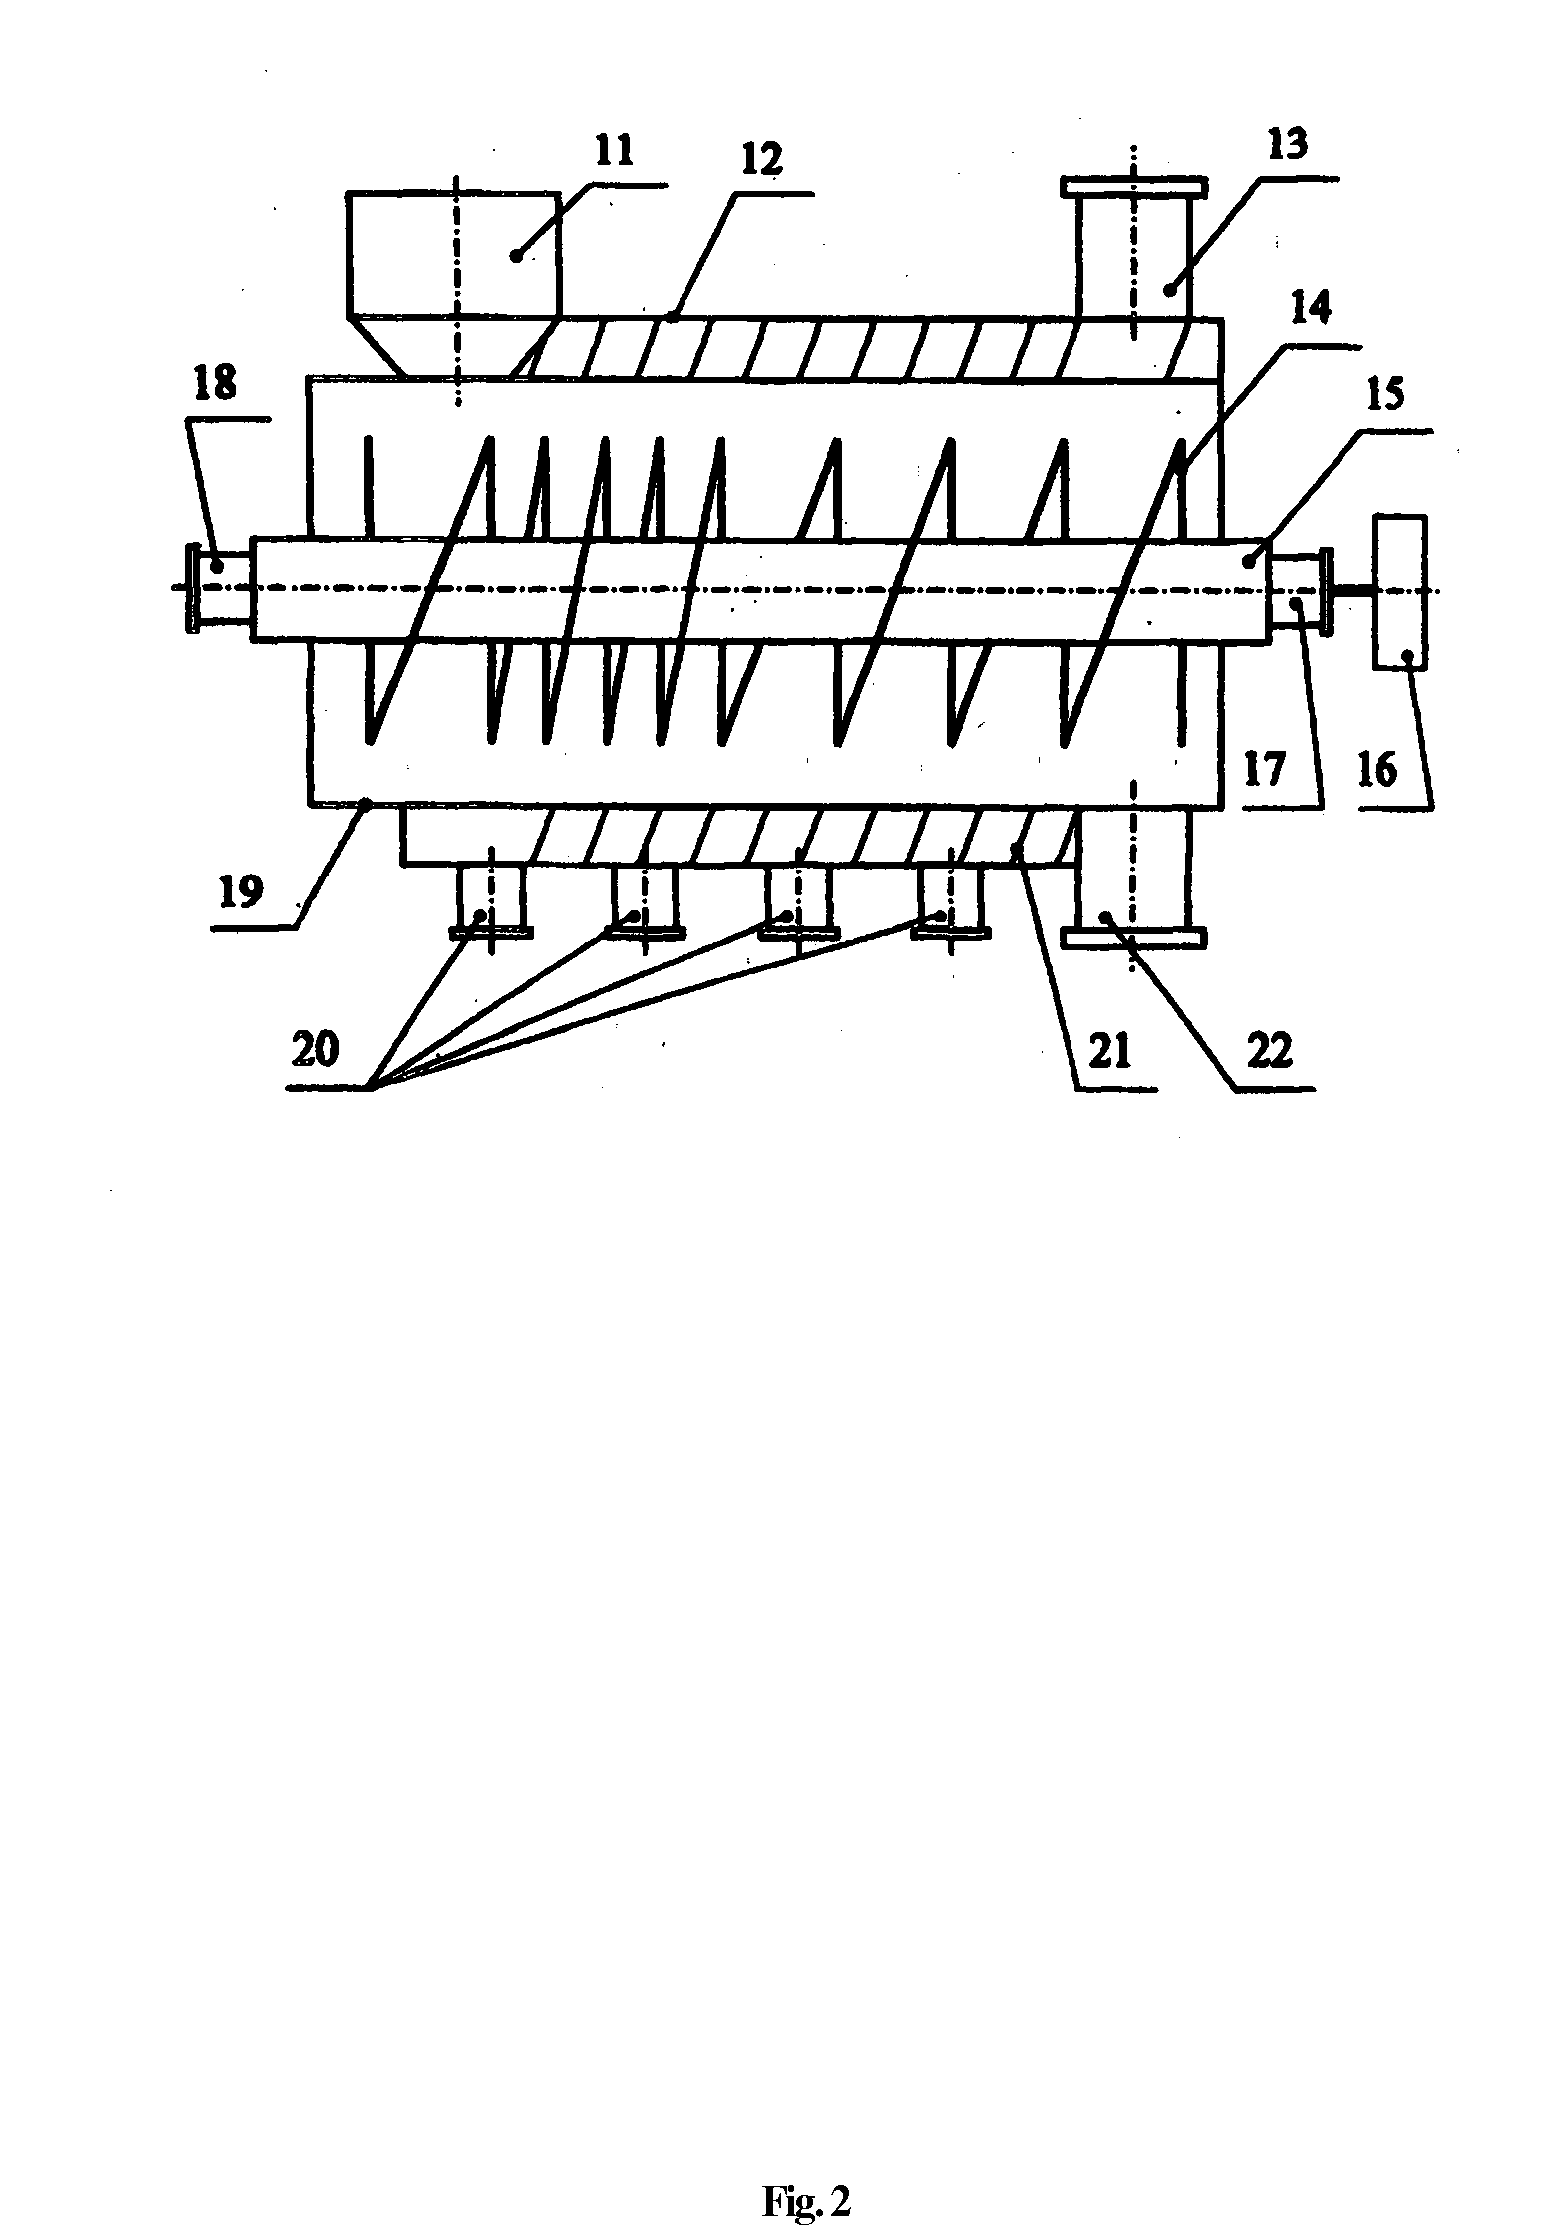 Method and Device for Processing Domestic and Industrial Organic Waste